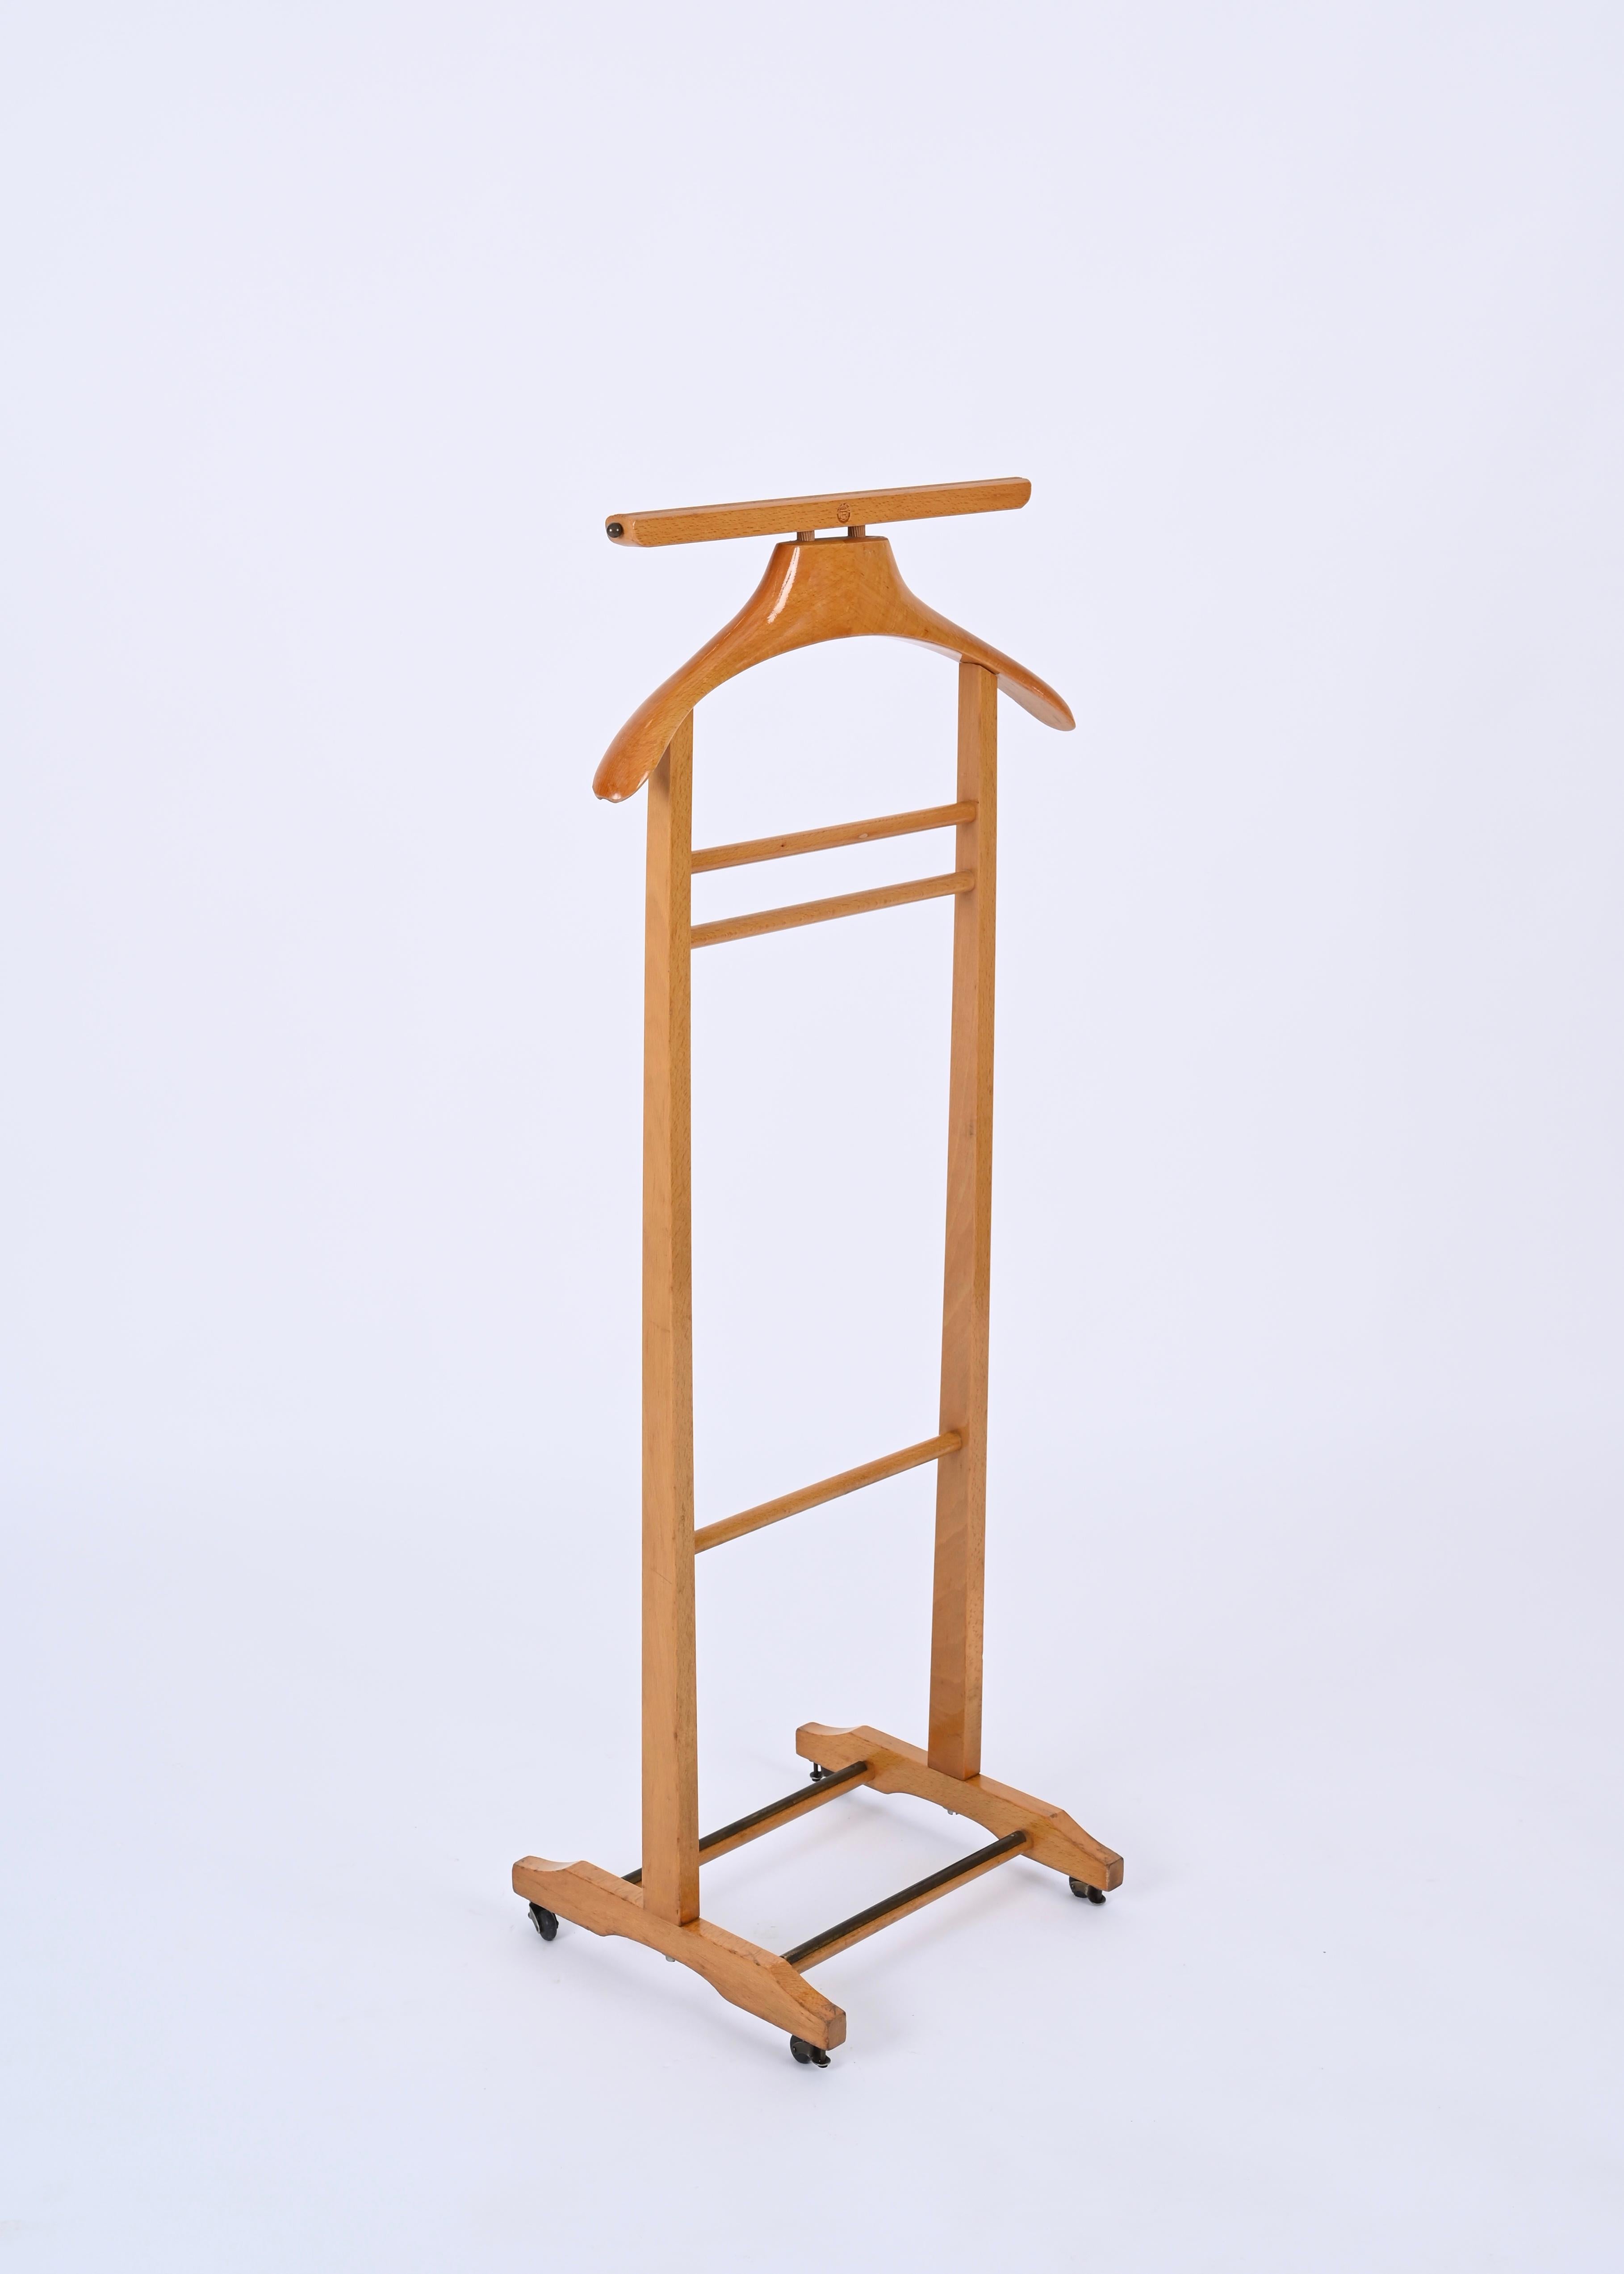 Fratelli Reguitti Midcentury Valet Stand in Beechwood and Brass, Italy, 1960s For Sale 2